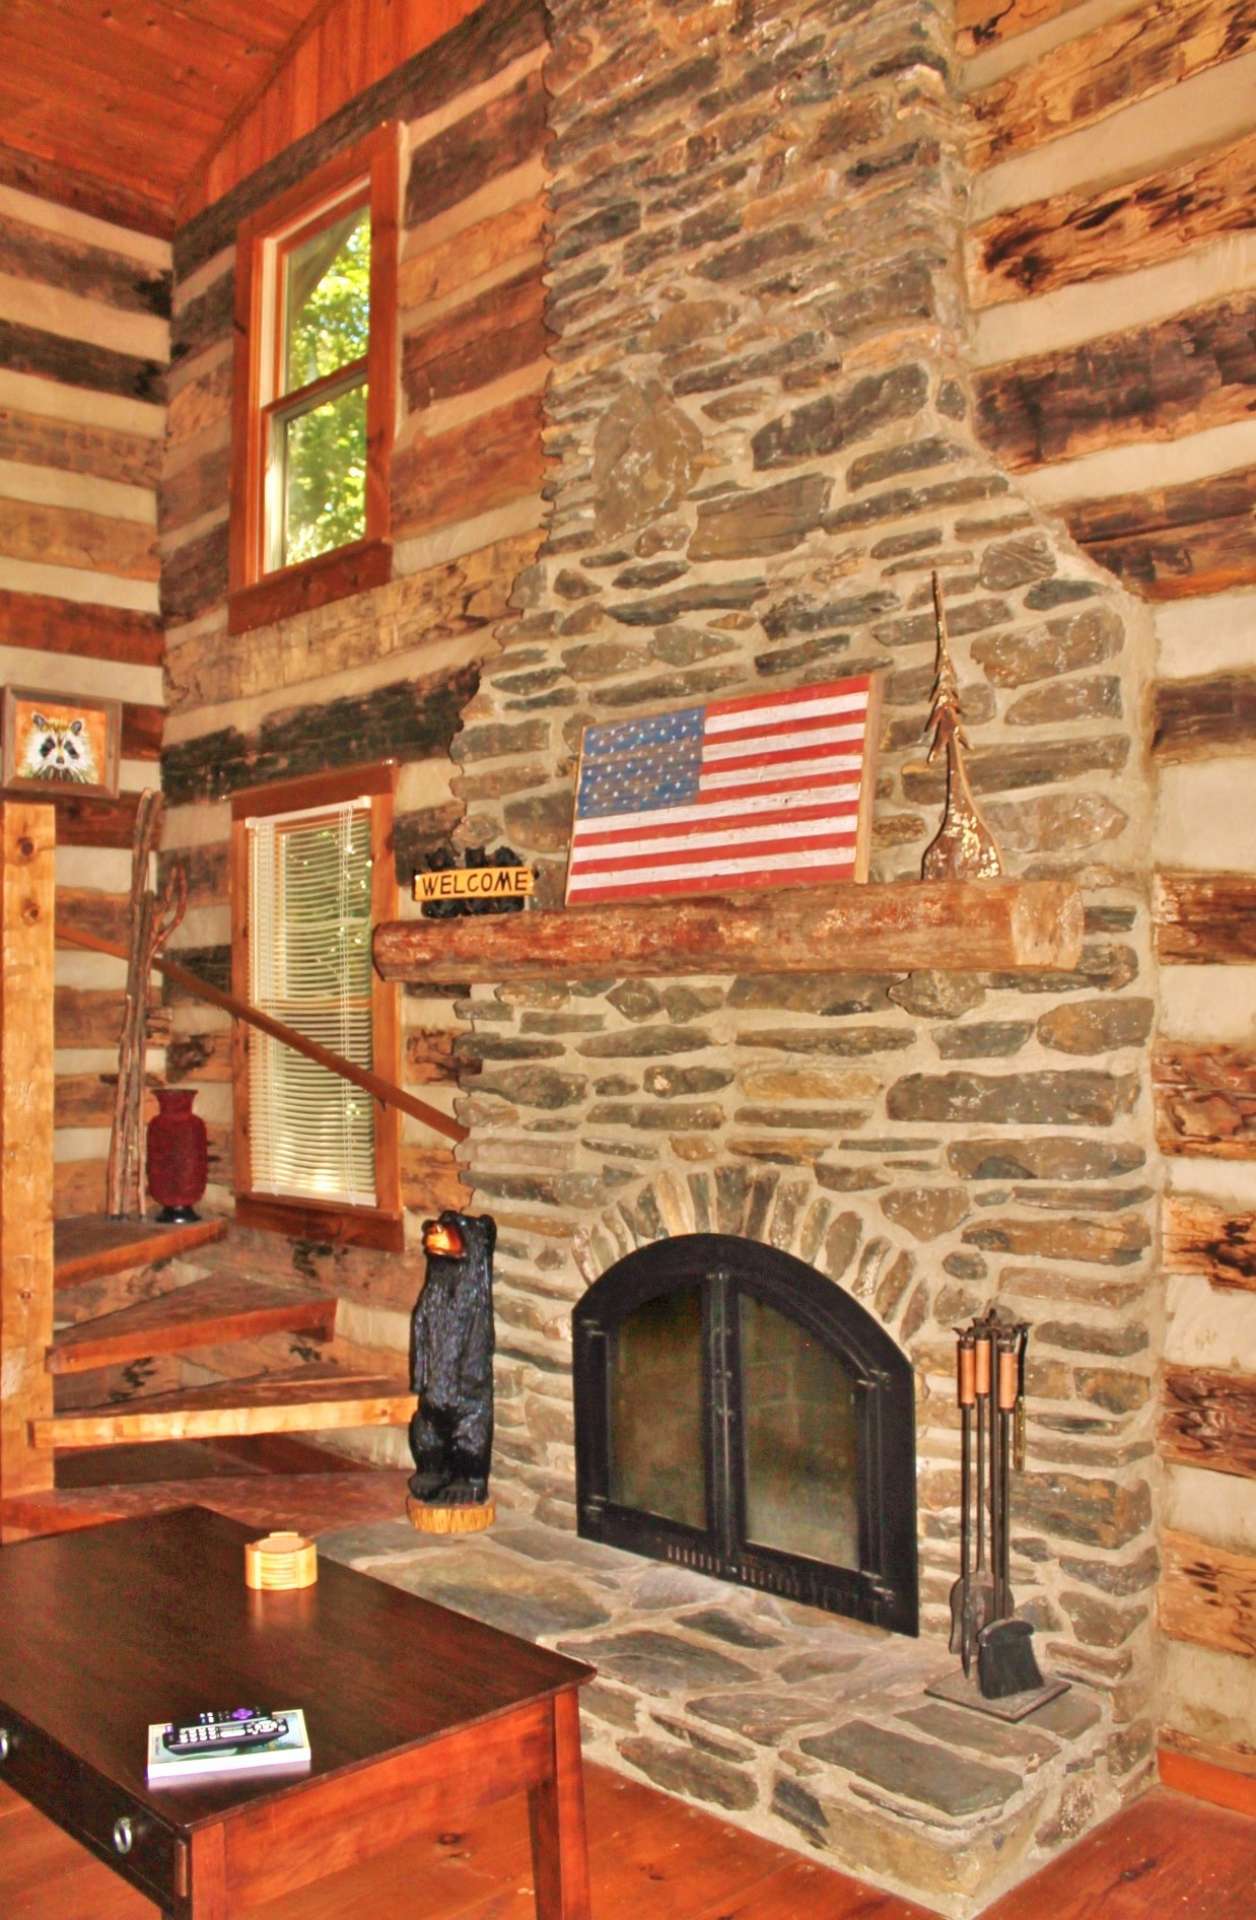 Experience true log cabin living with all of today's modern conveniences.